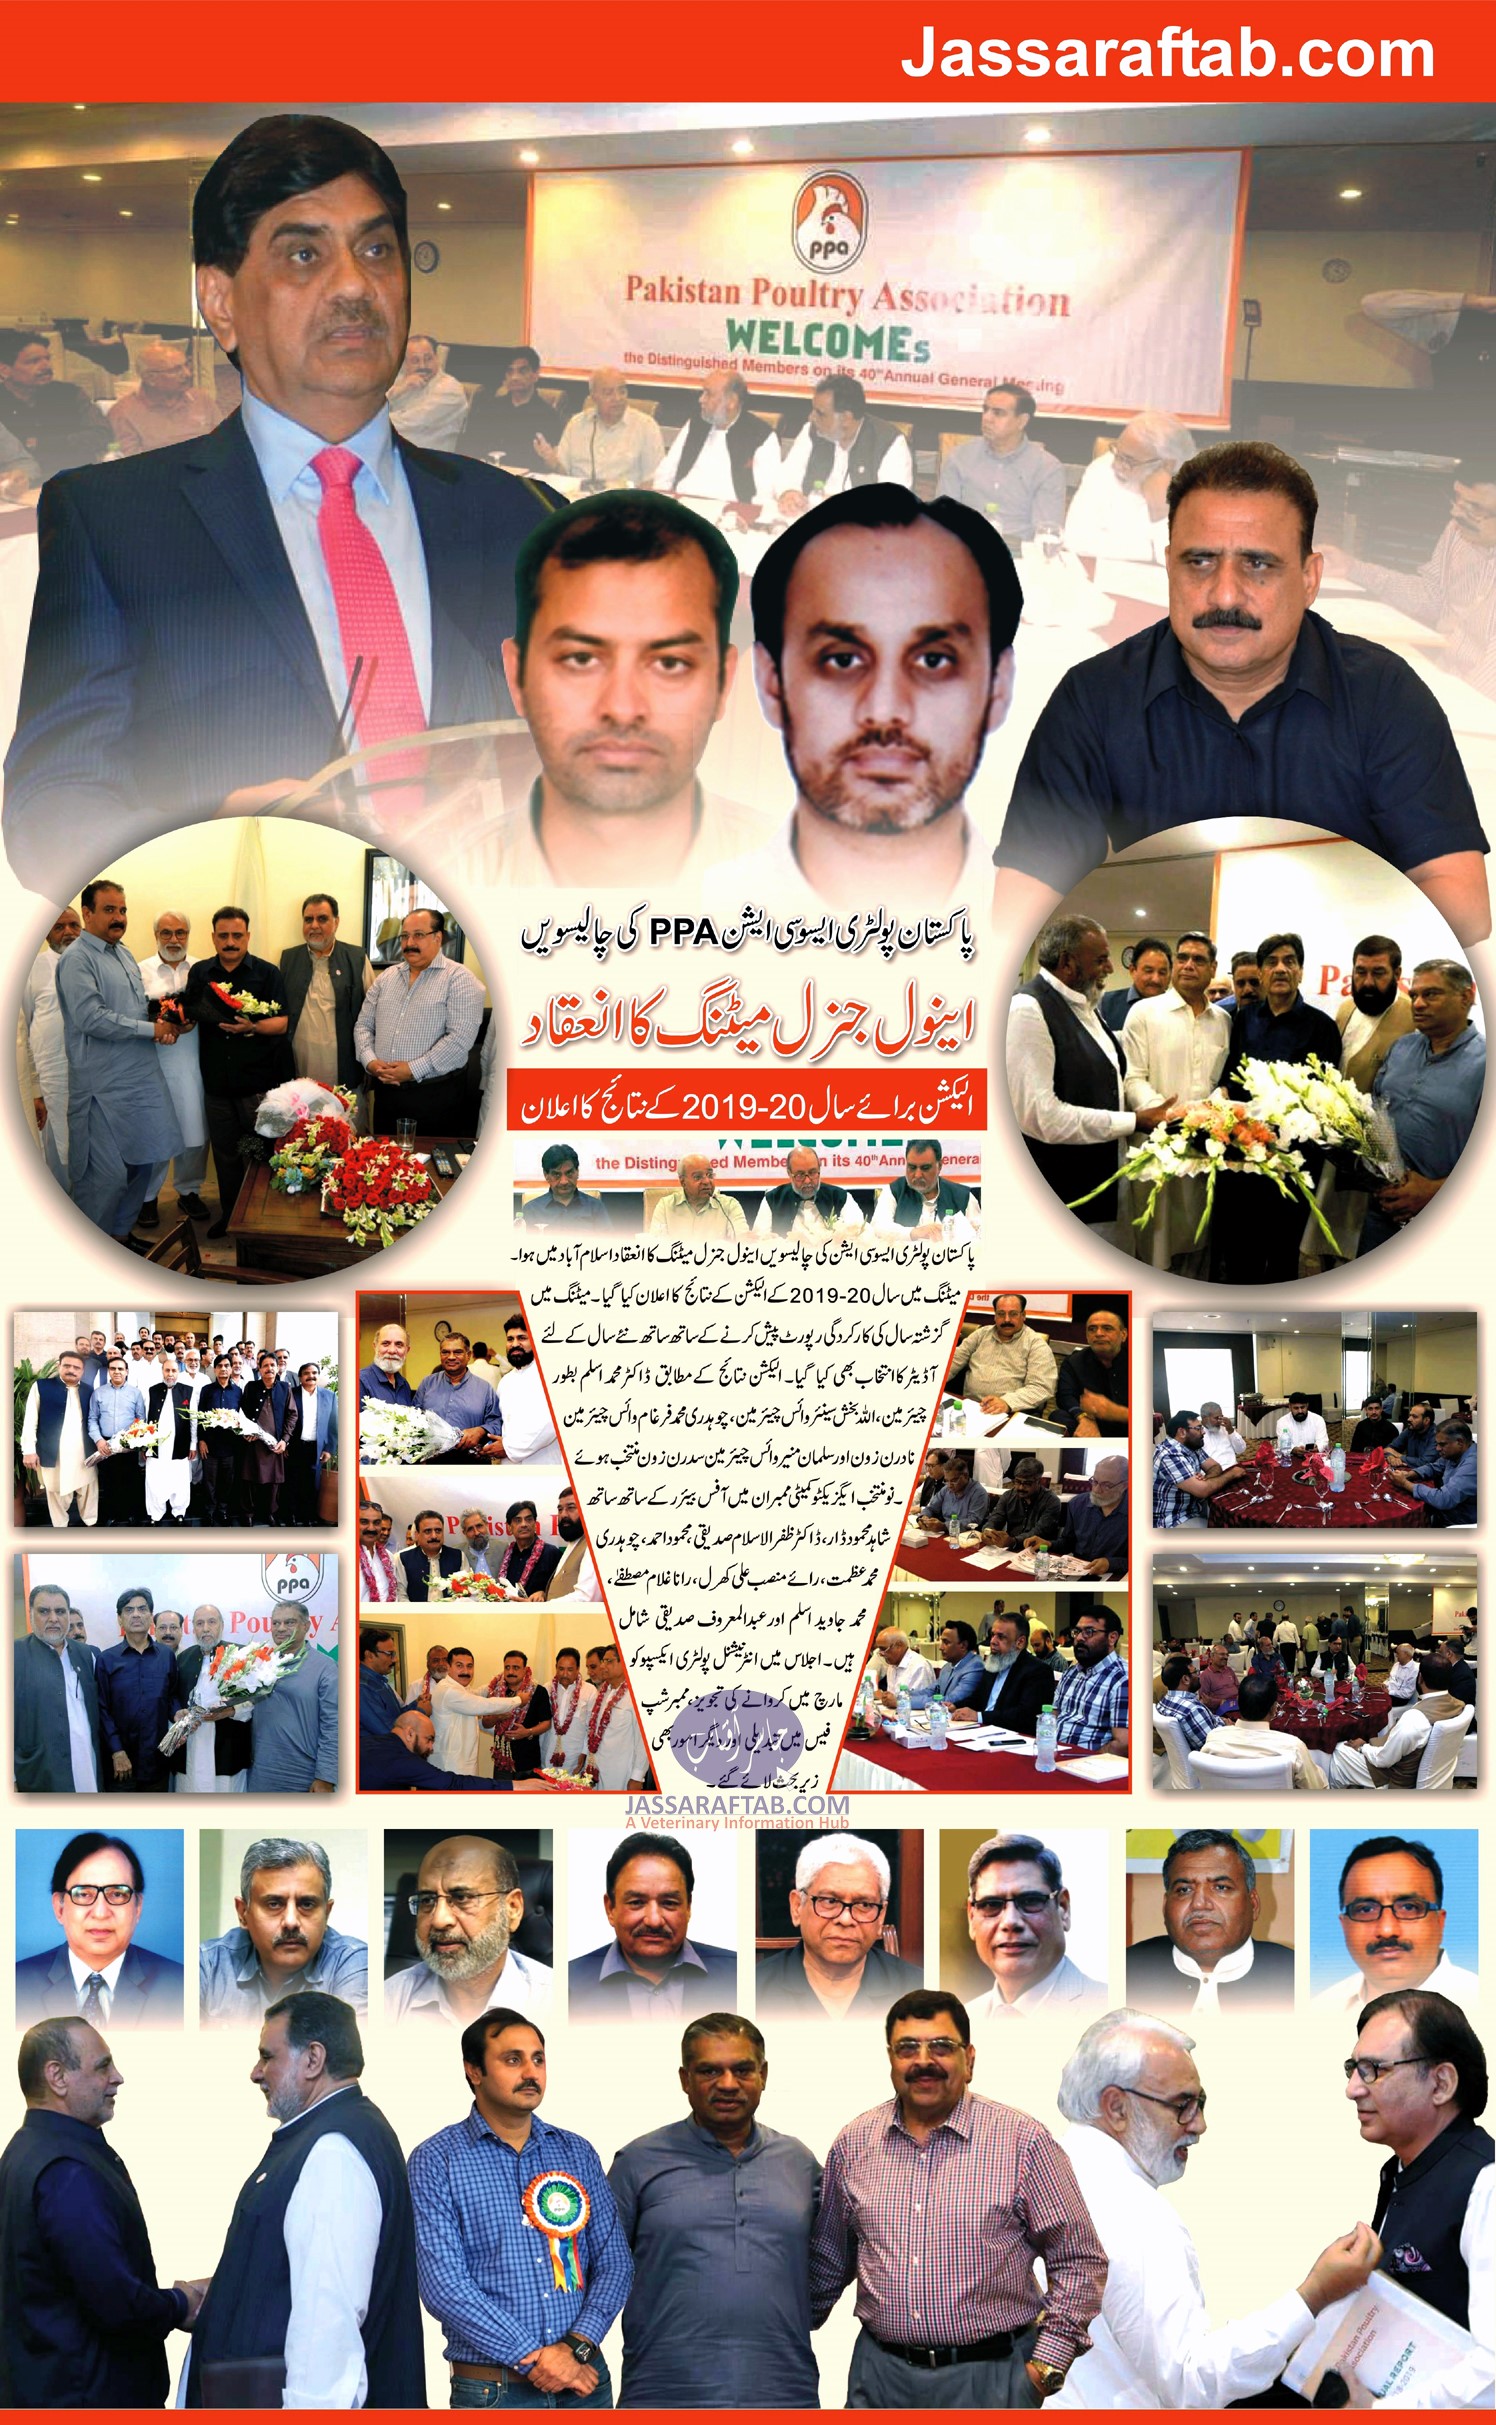 Annual General Meeting of Pakistan Poultry Association Election 2019